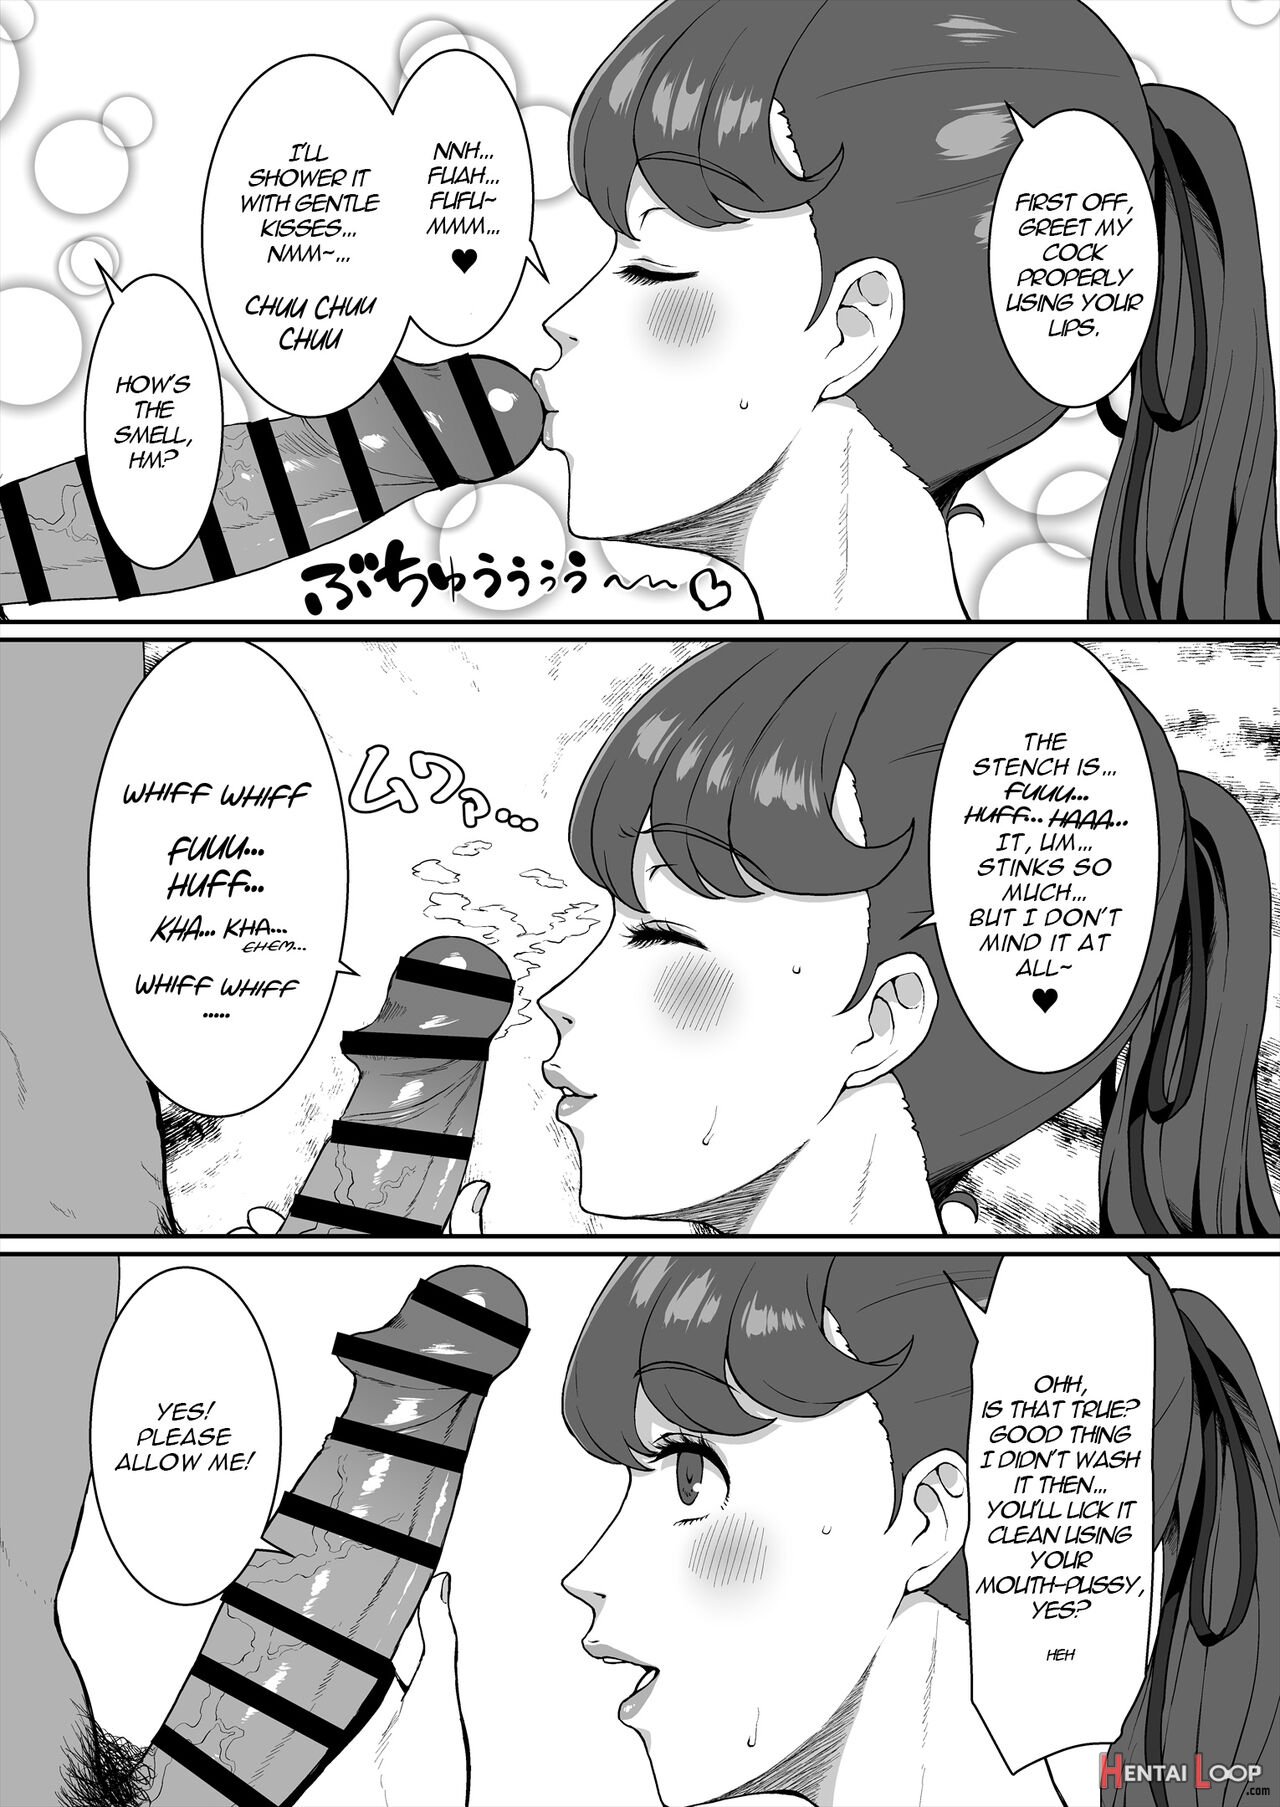 The Other Senpai page 8